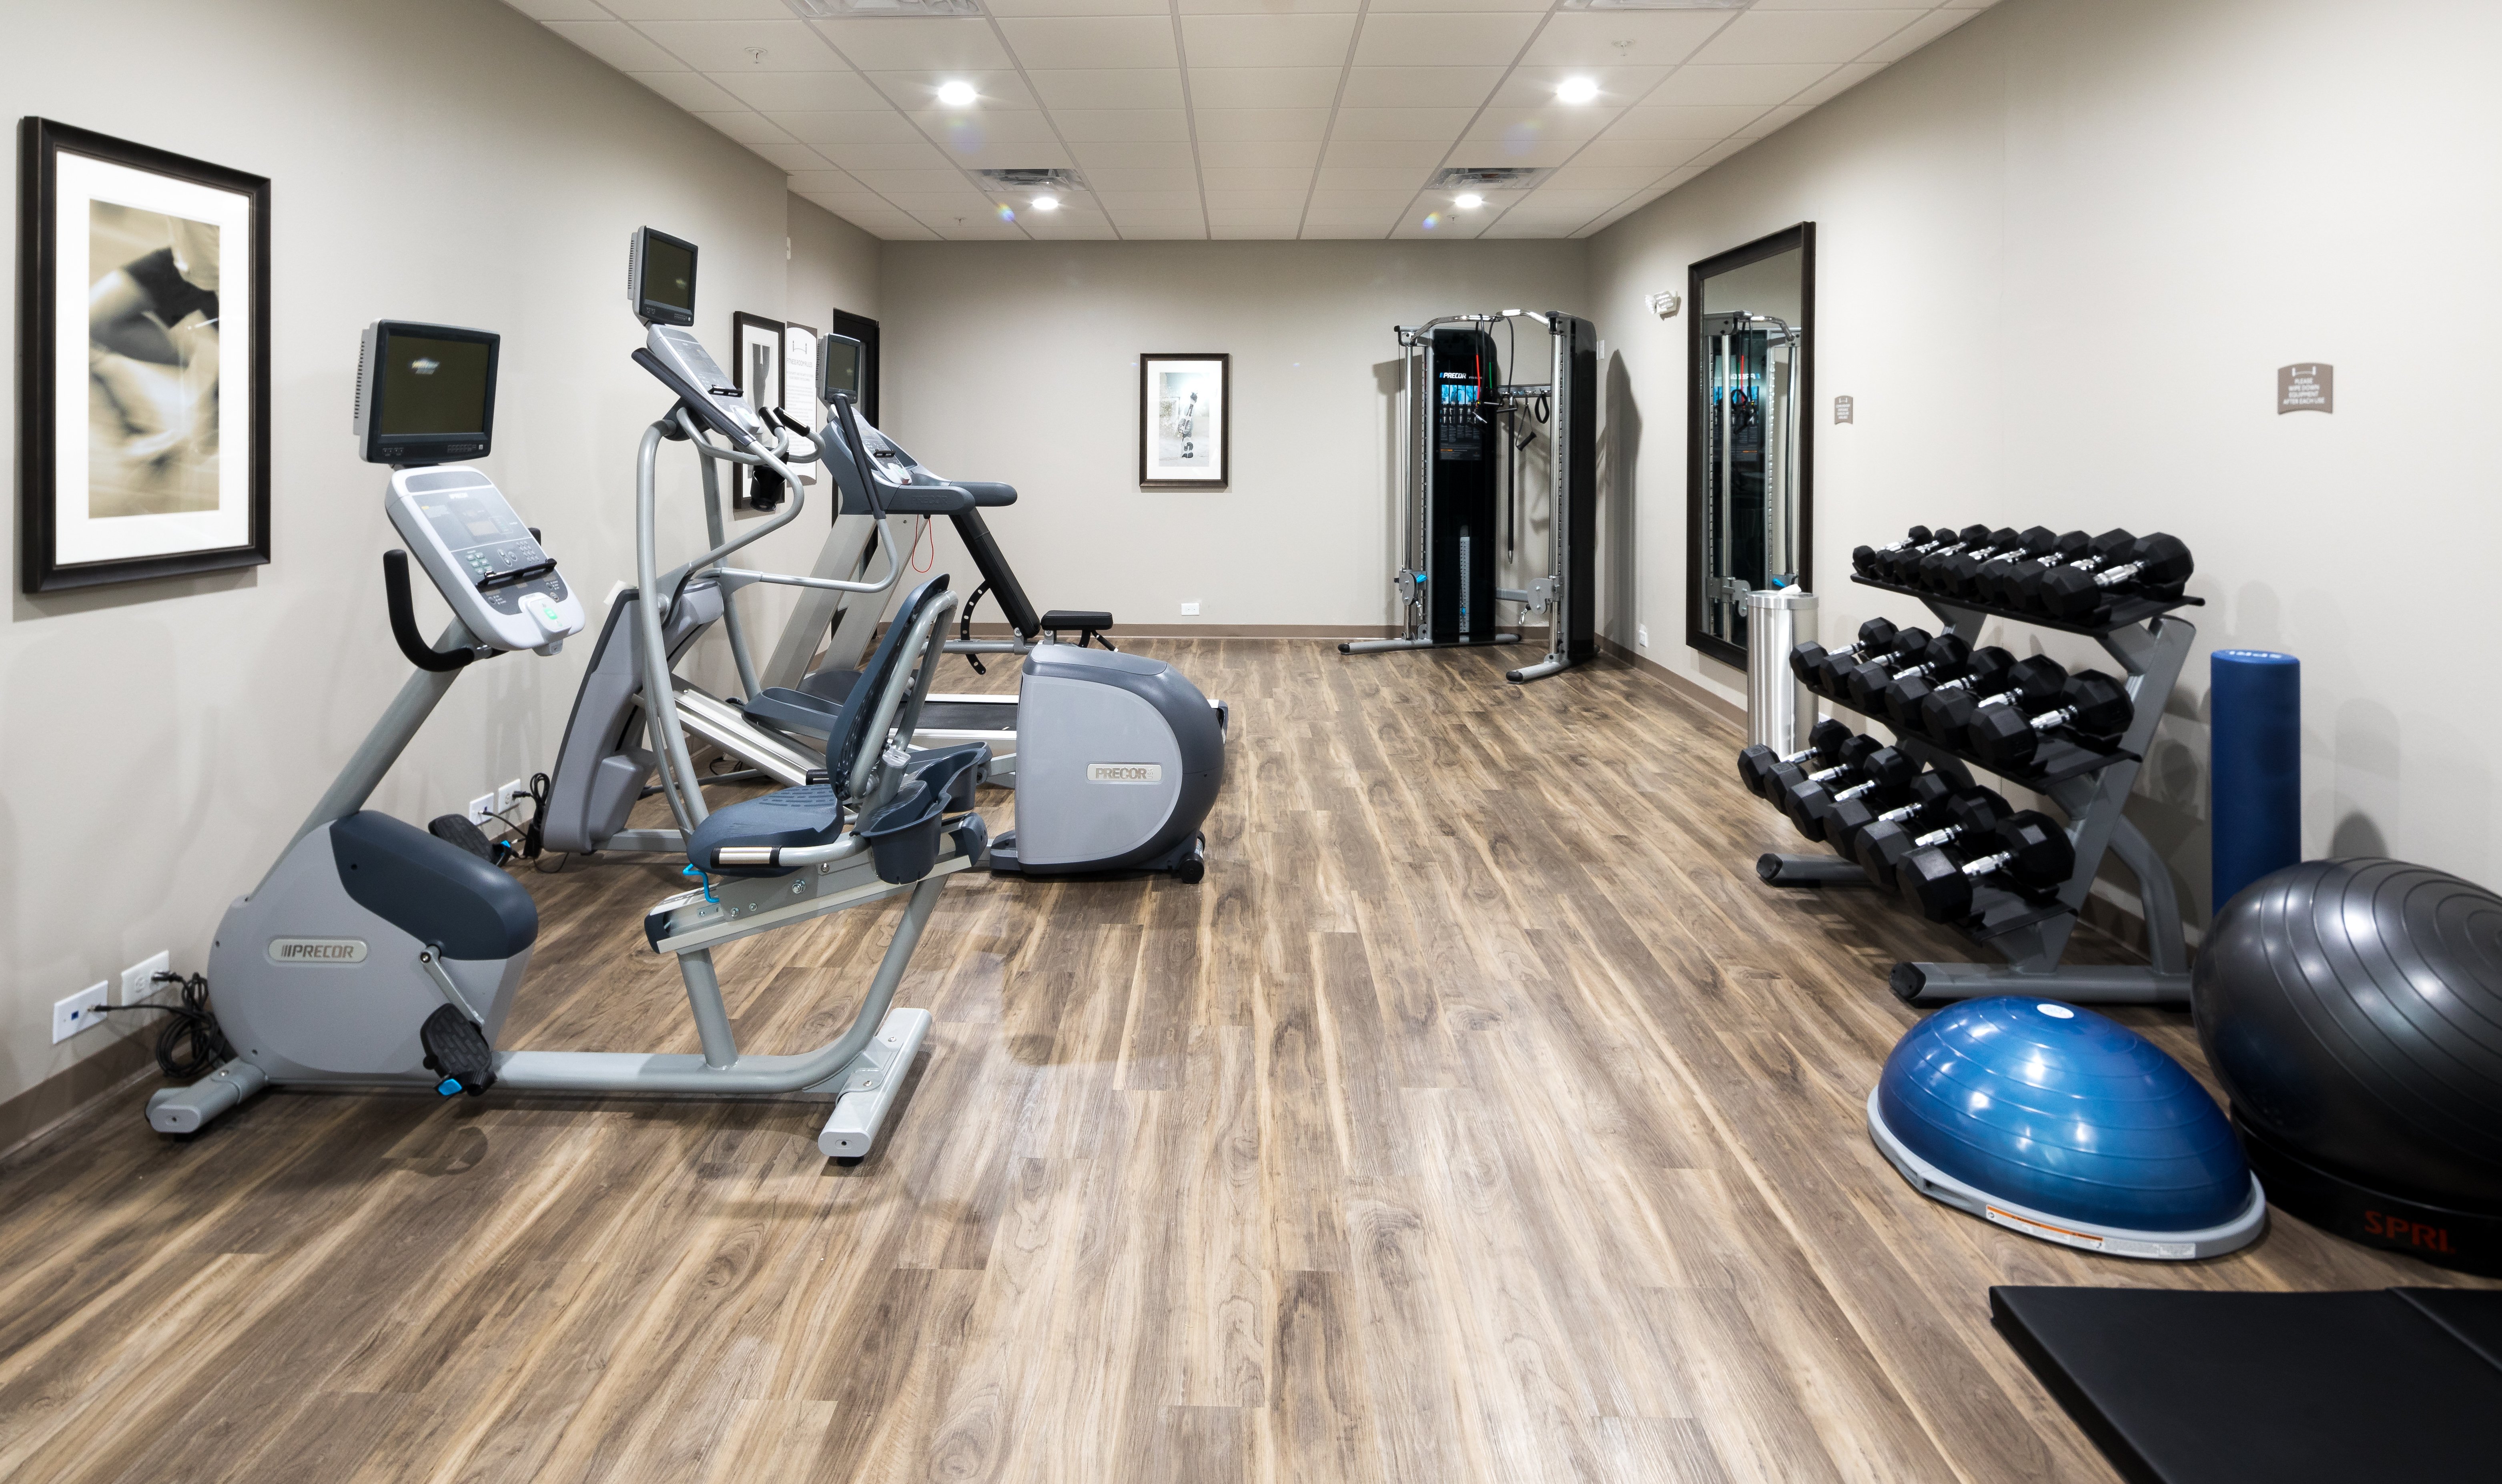 Keep your workout routine in our fully equipped fitness room!